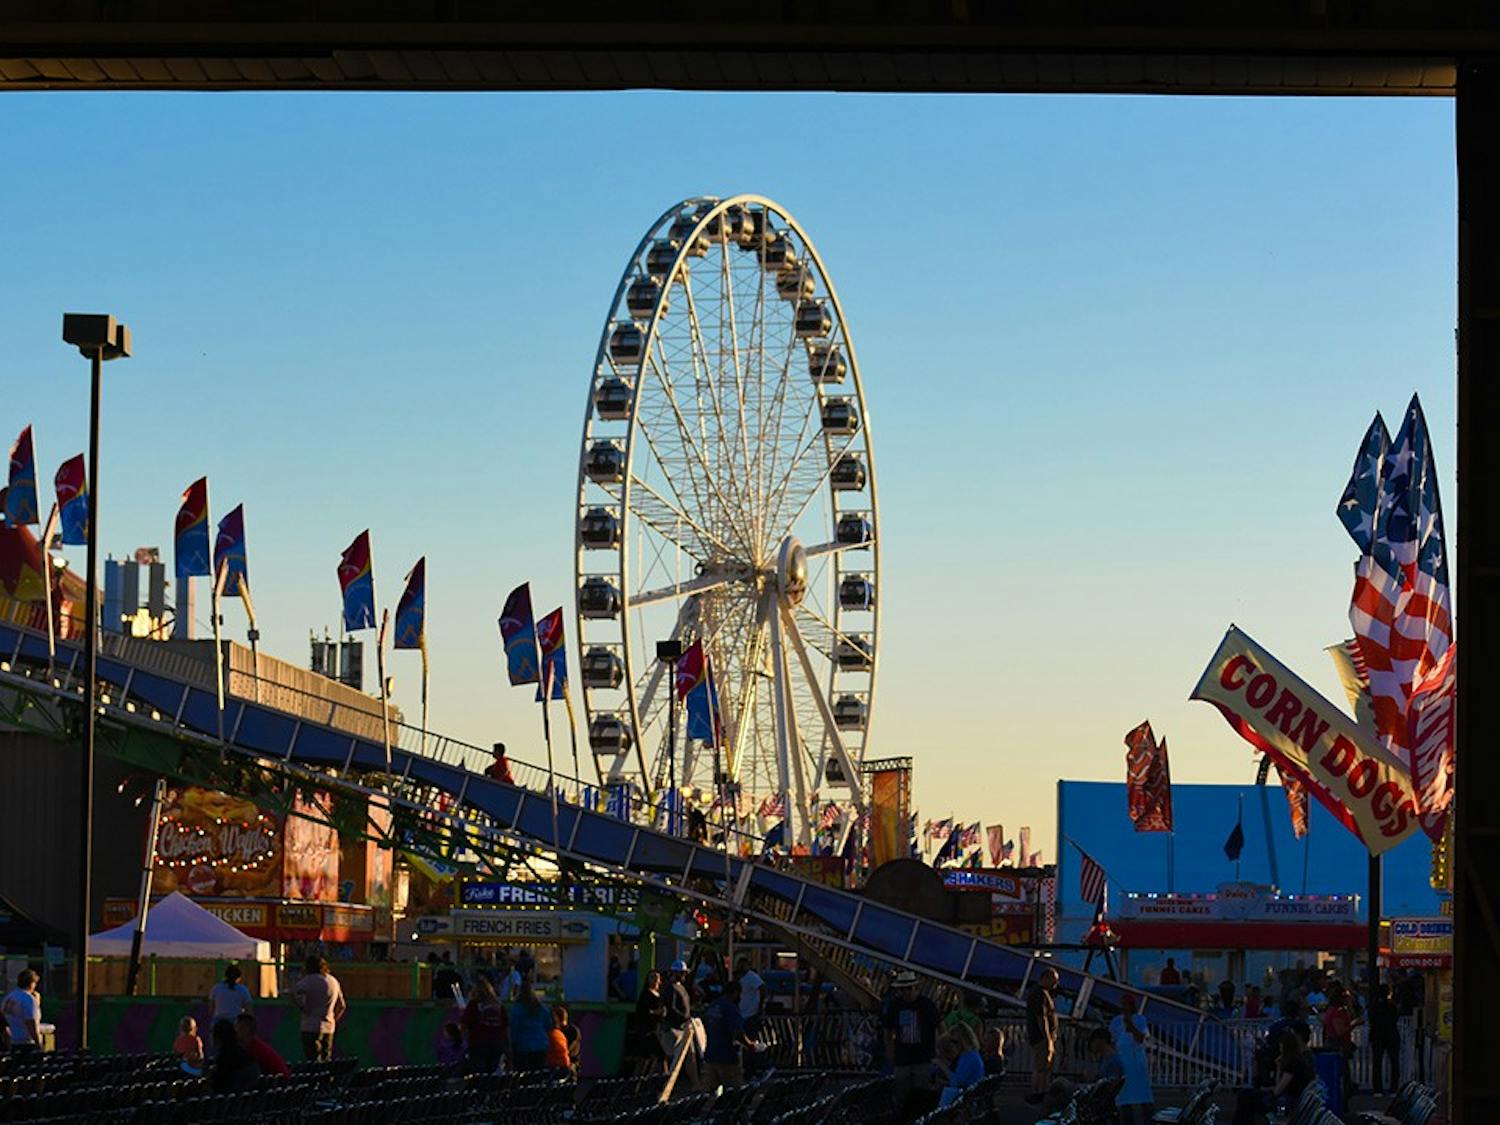 The Ferris wheel at the South Carolina State Fair sits prominently among the rest of the rides.&nbsp;